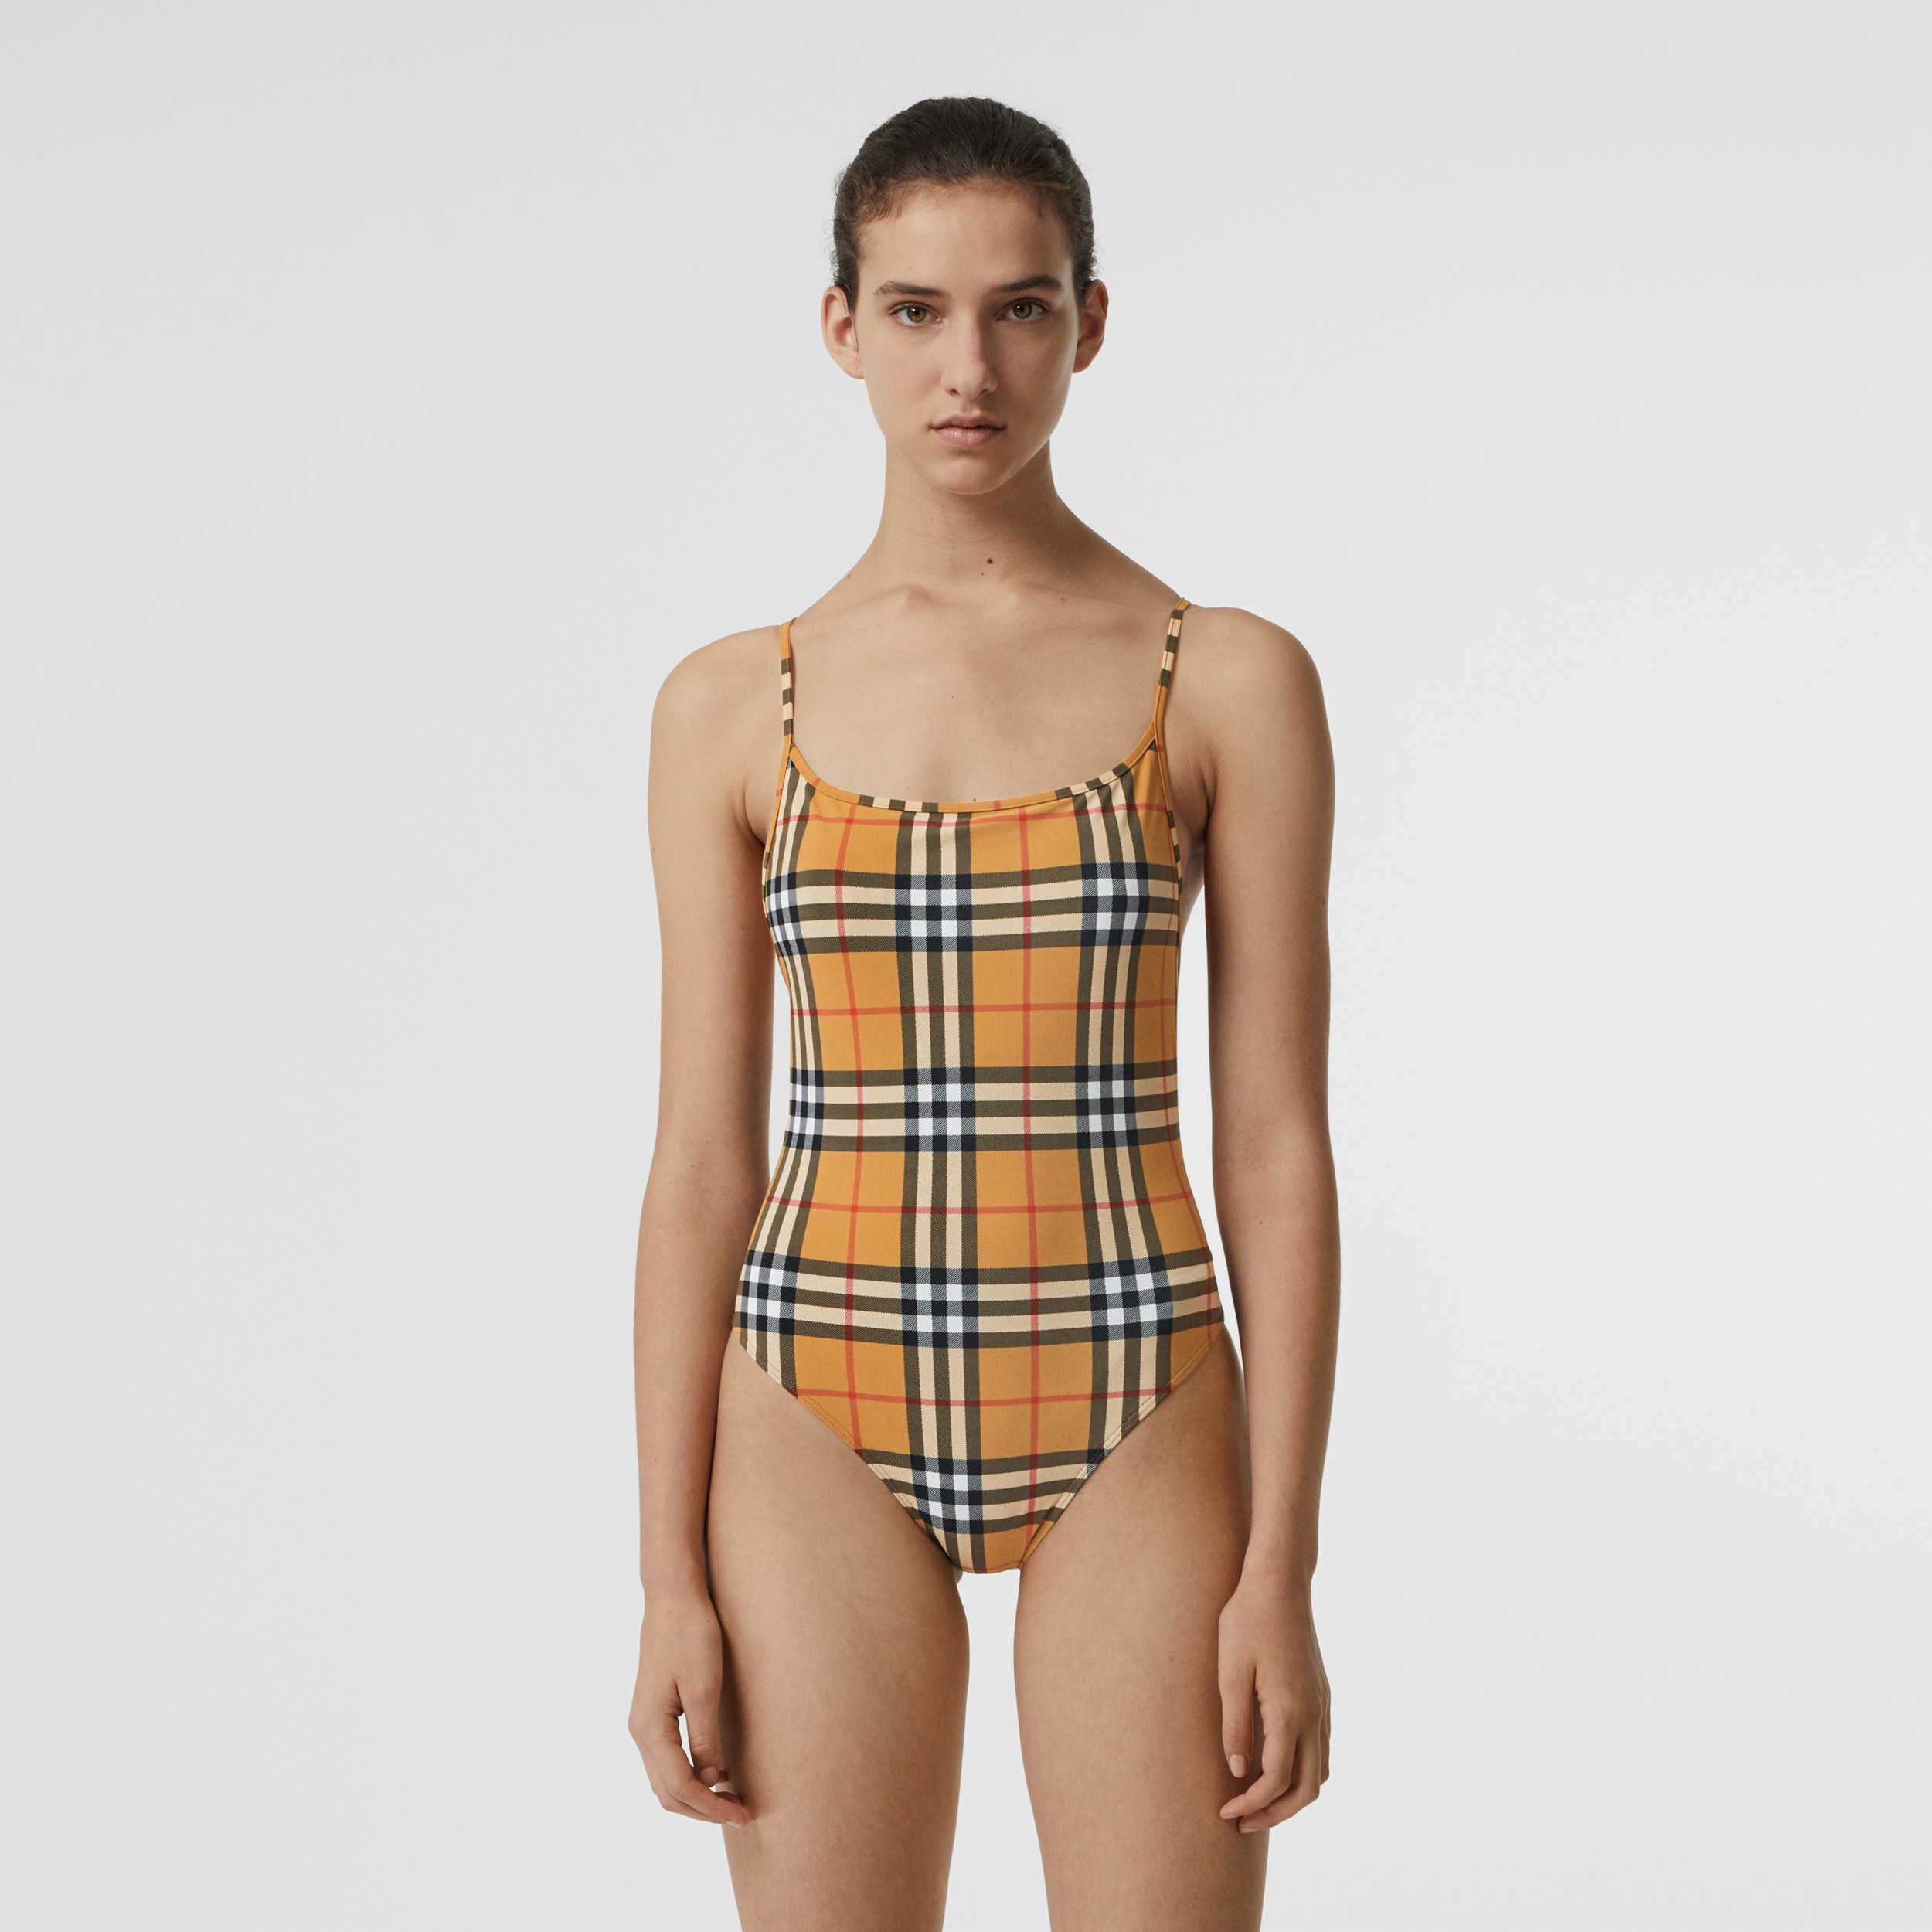 Vintage Check Swimsuit in Camel - Women | Burberry United States